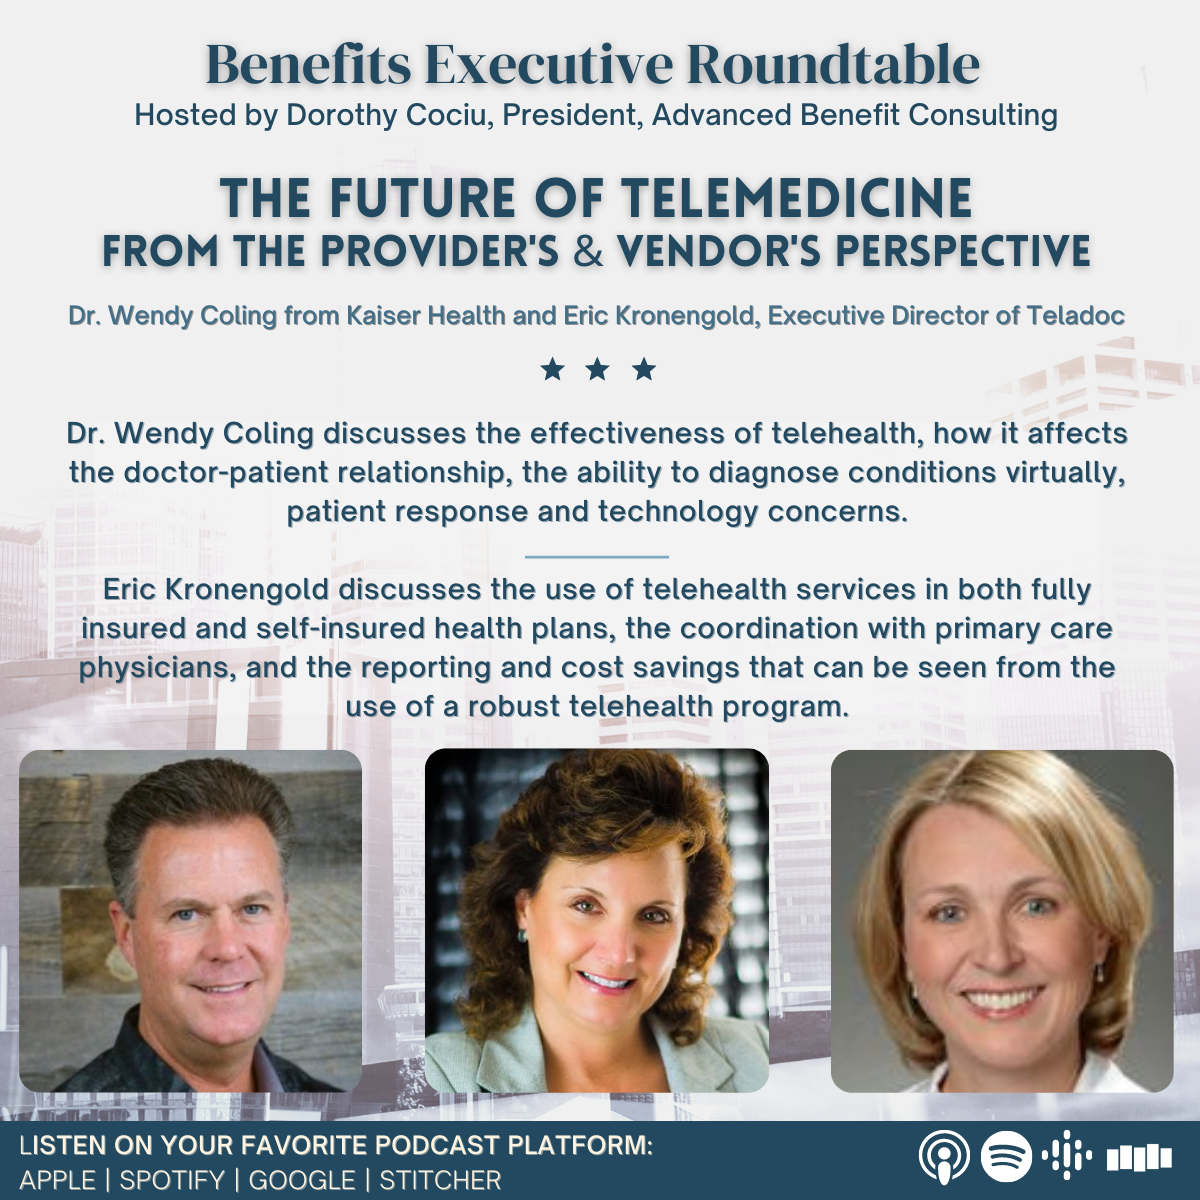 The Future of Telemedicine from the Provider's and Vendor's Perspective